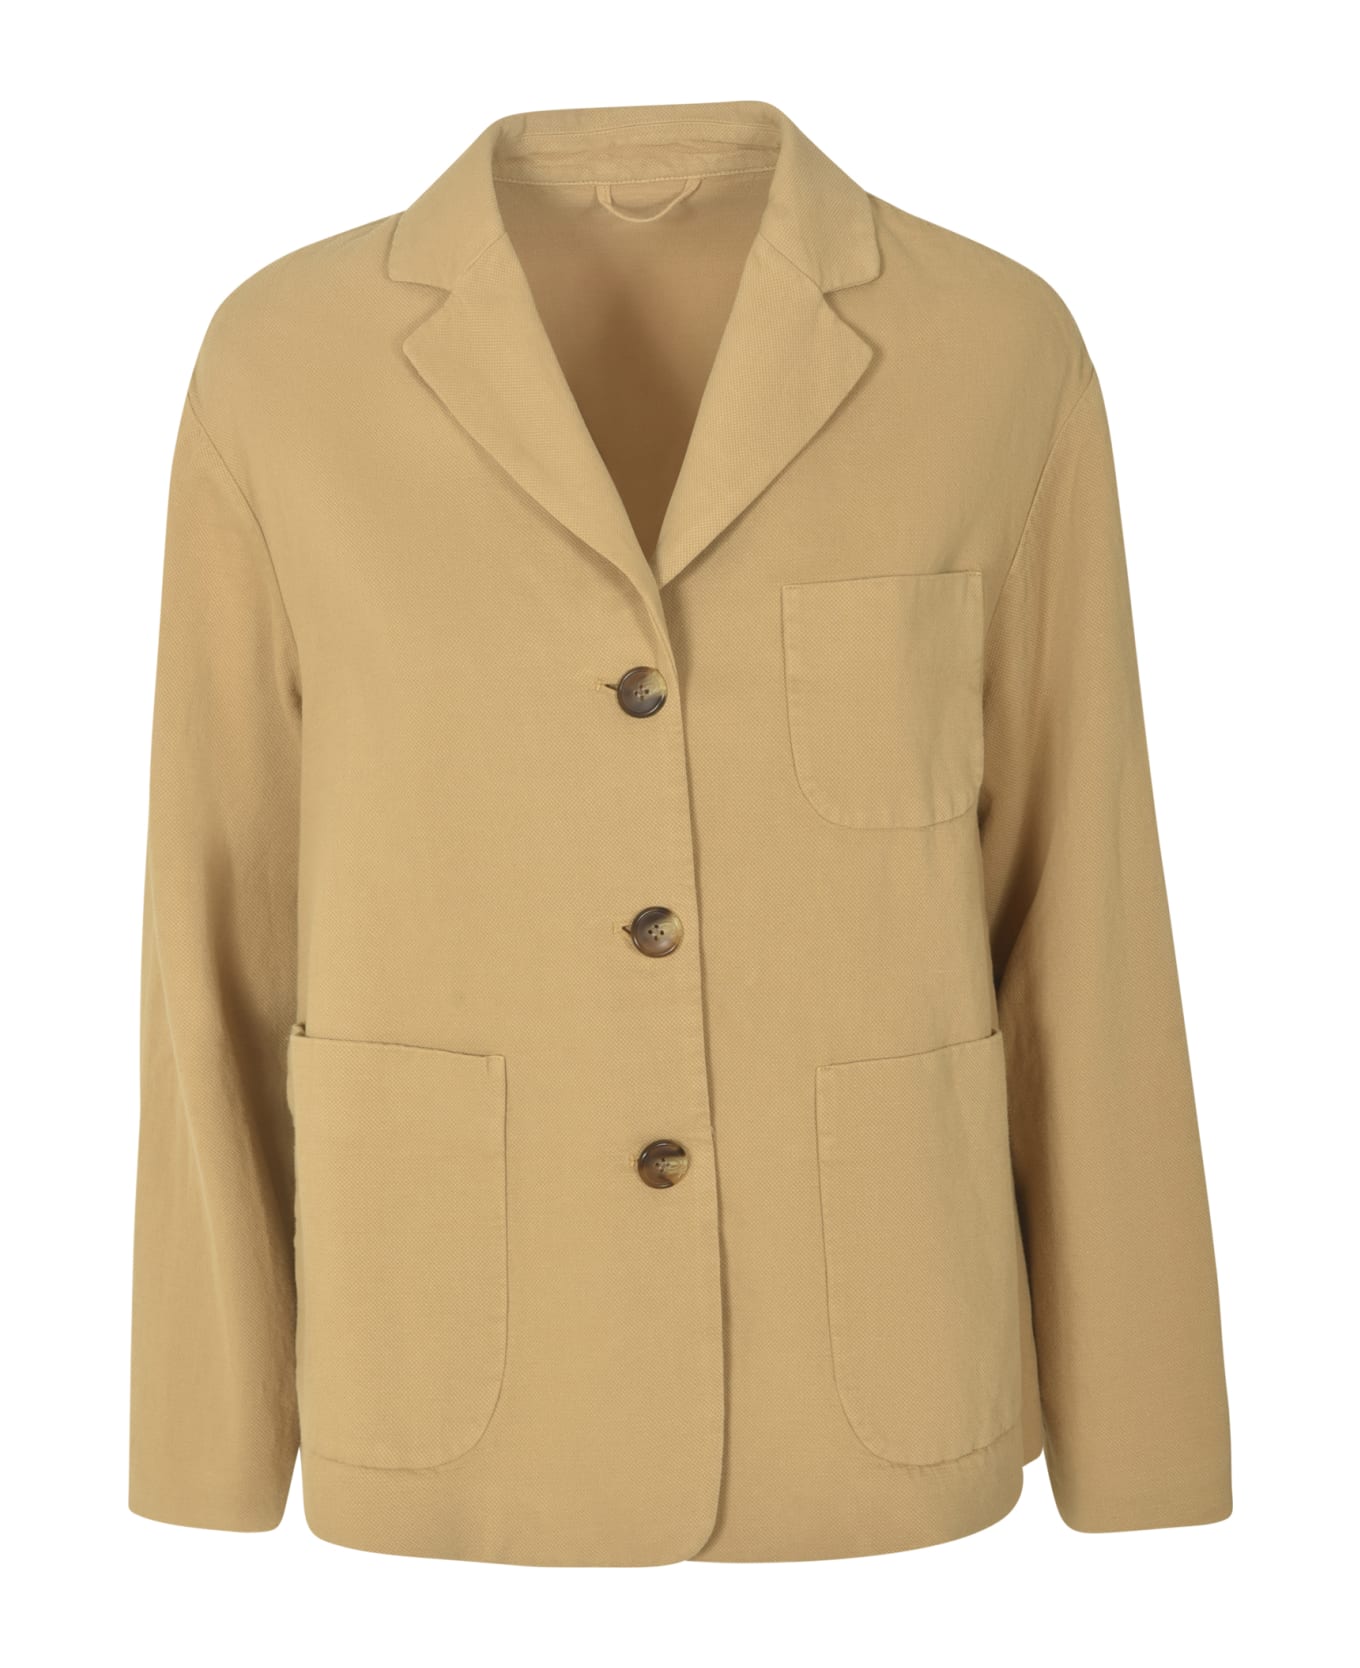 Kiltie Patched Pocket Buttoned Jacket - Beige ブレザー